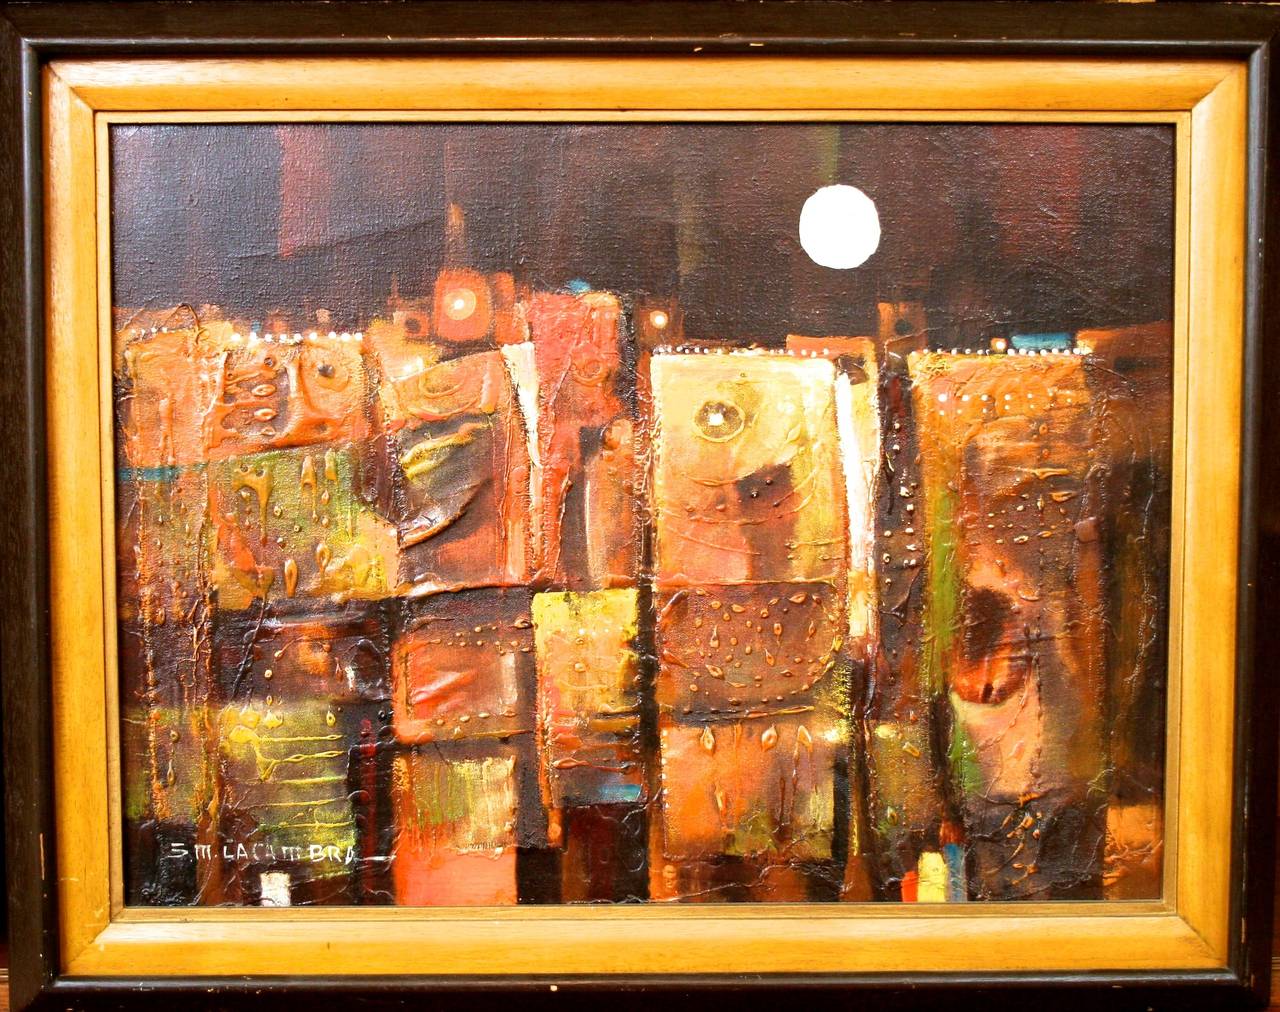 Beautiful painting by S.M. Lacambra executed in oil paint and fiberglass. Textured contours and textures rise from the canvas to create striking figures in organic earth tones. Bright full moon in the background is the finishing touch to complete